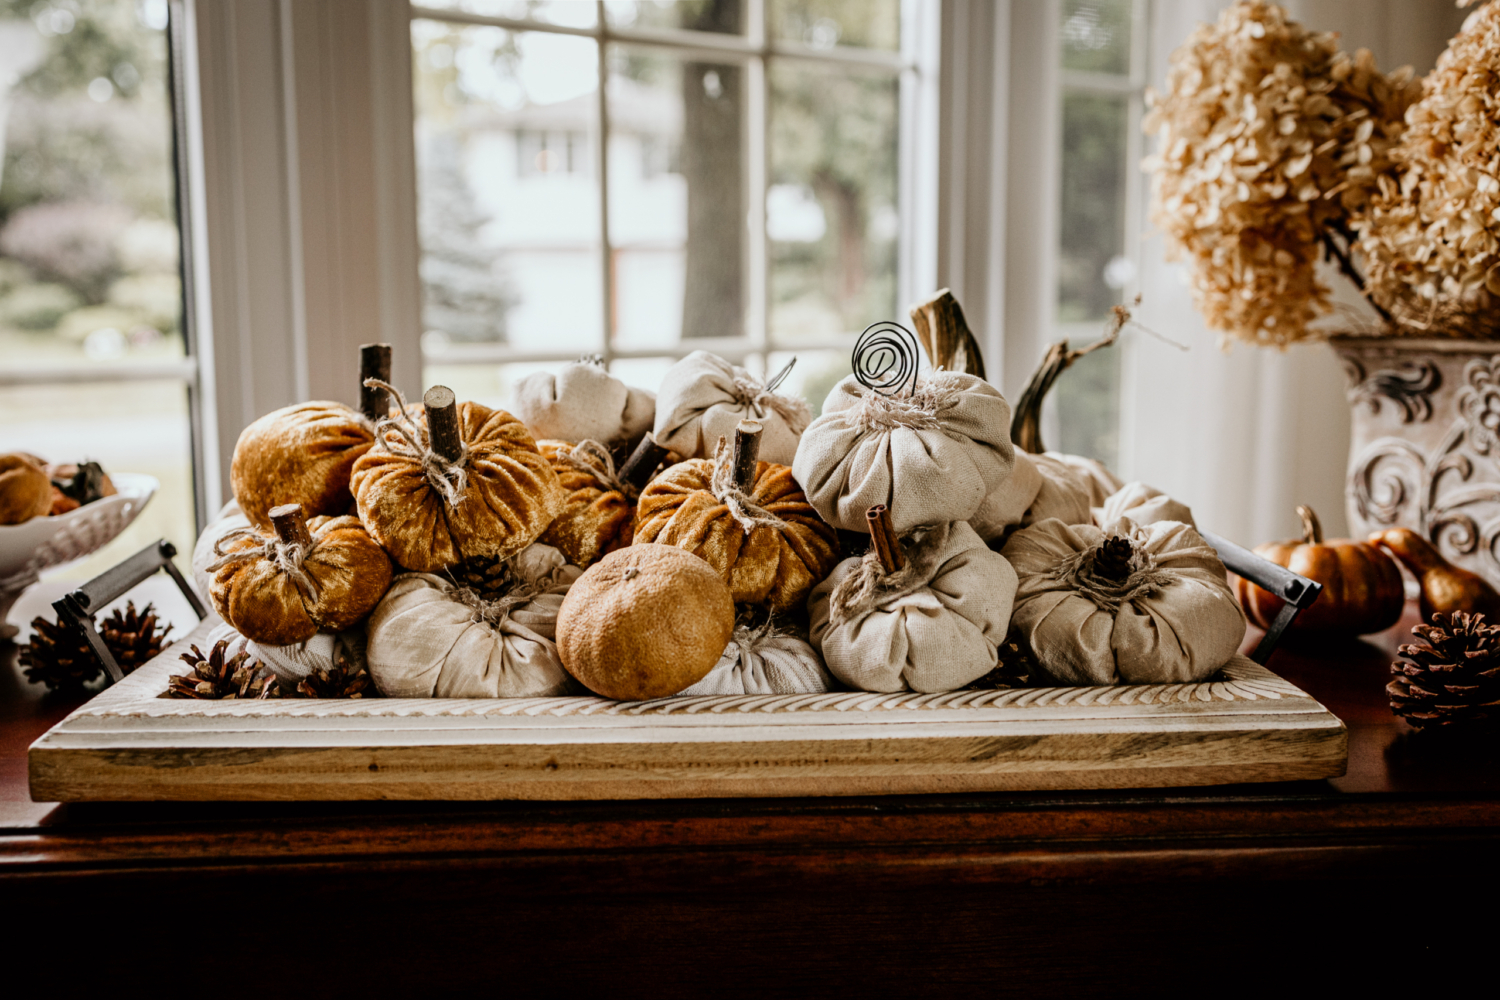 A natural wood tray is placed in front of a window and is filled with the pumpkins sold in the shop.